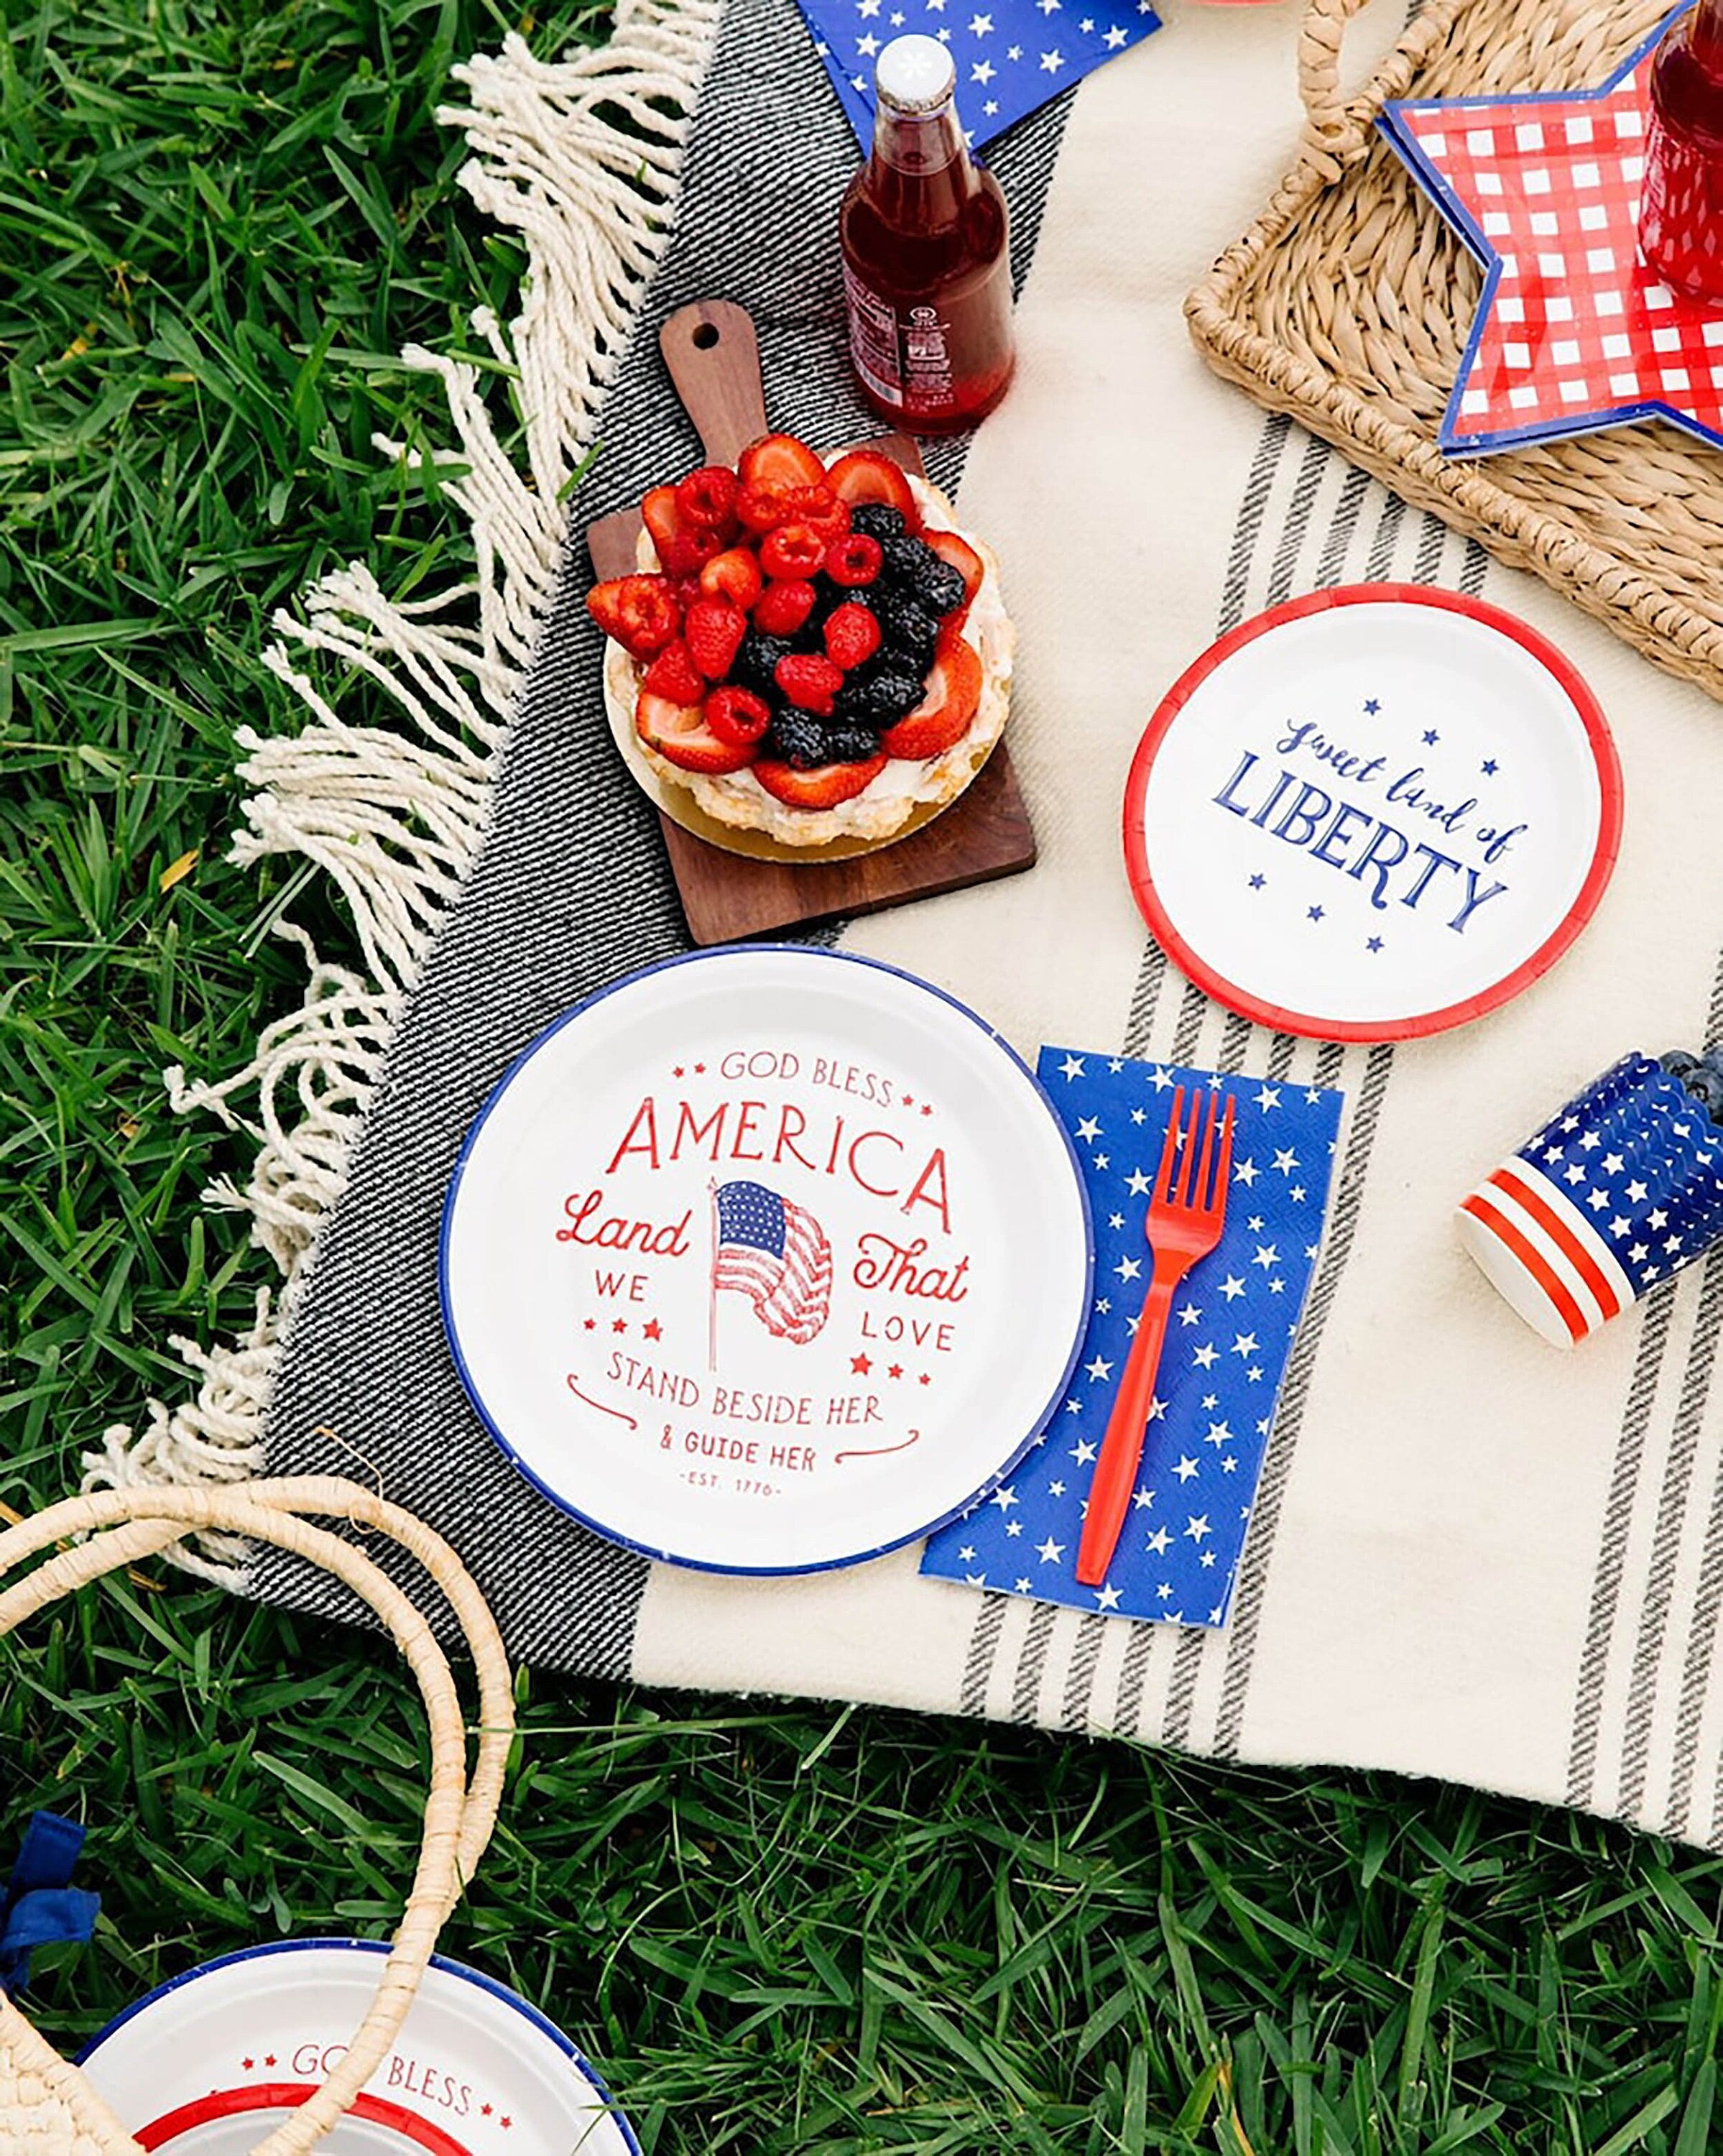 Sweet Land of Liberty - Patriotic Plates | 4th of July Plates - 4th of July Party Supplies - Fourth of July Party - Dessert Paper Plates